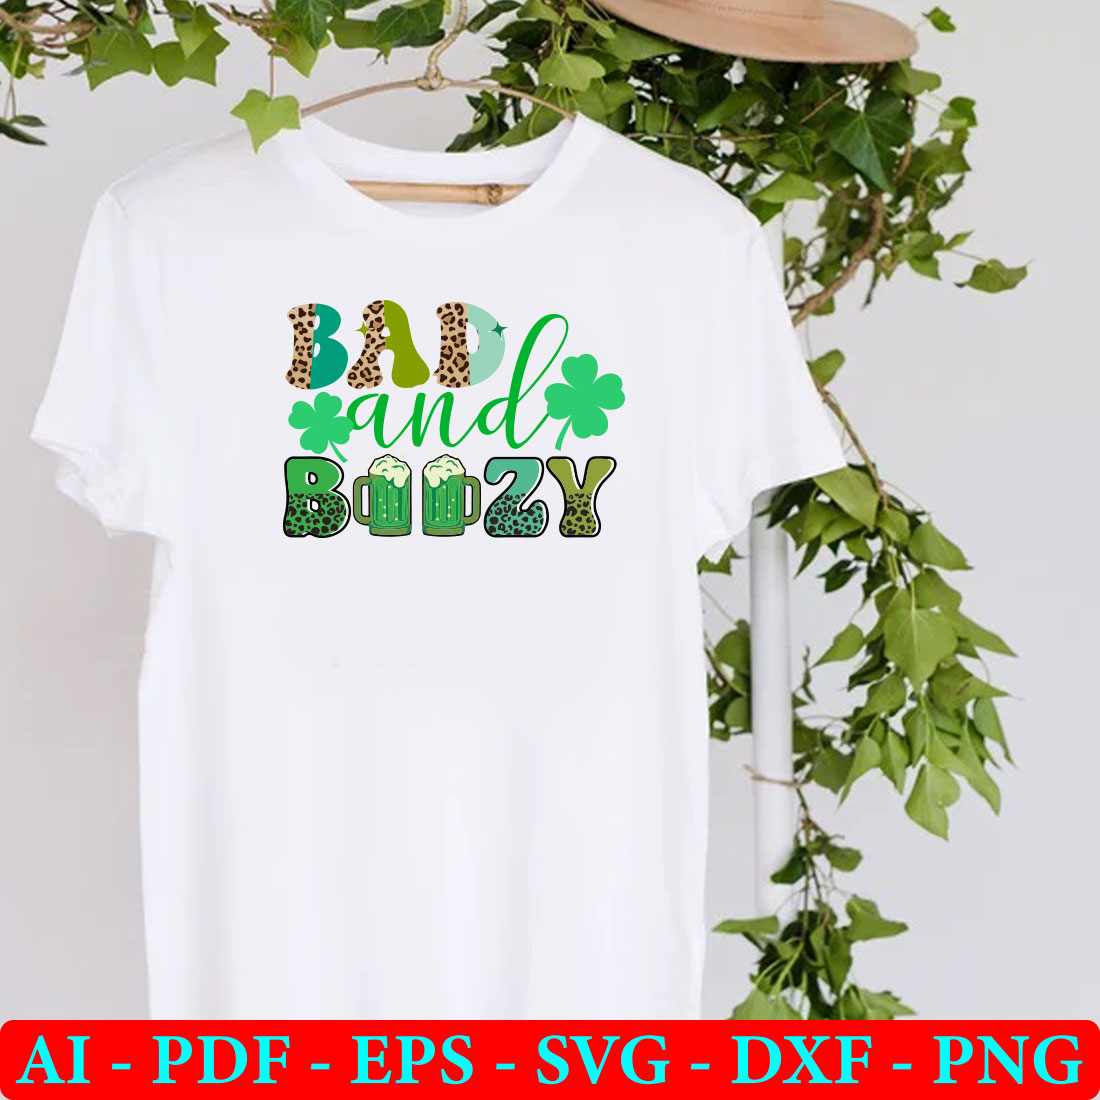 White t - shirt with the words bad and booy printed on it.